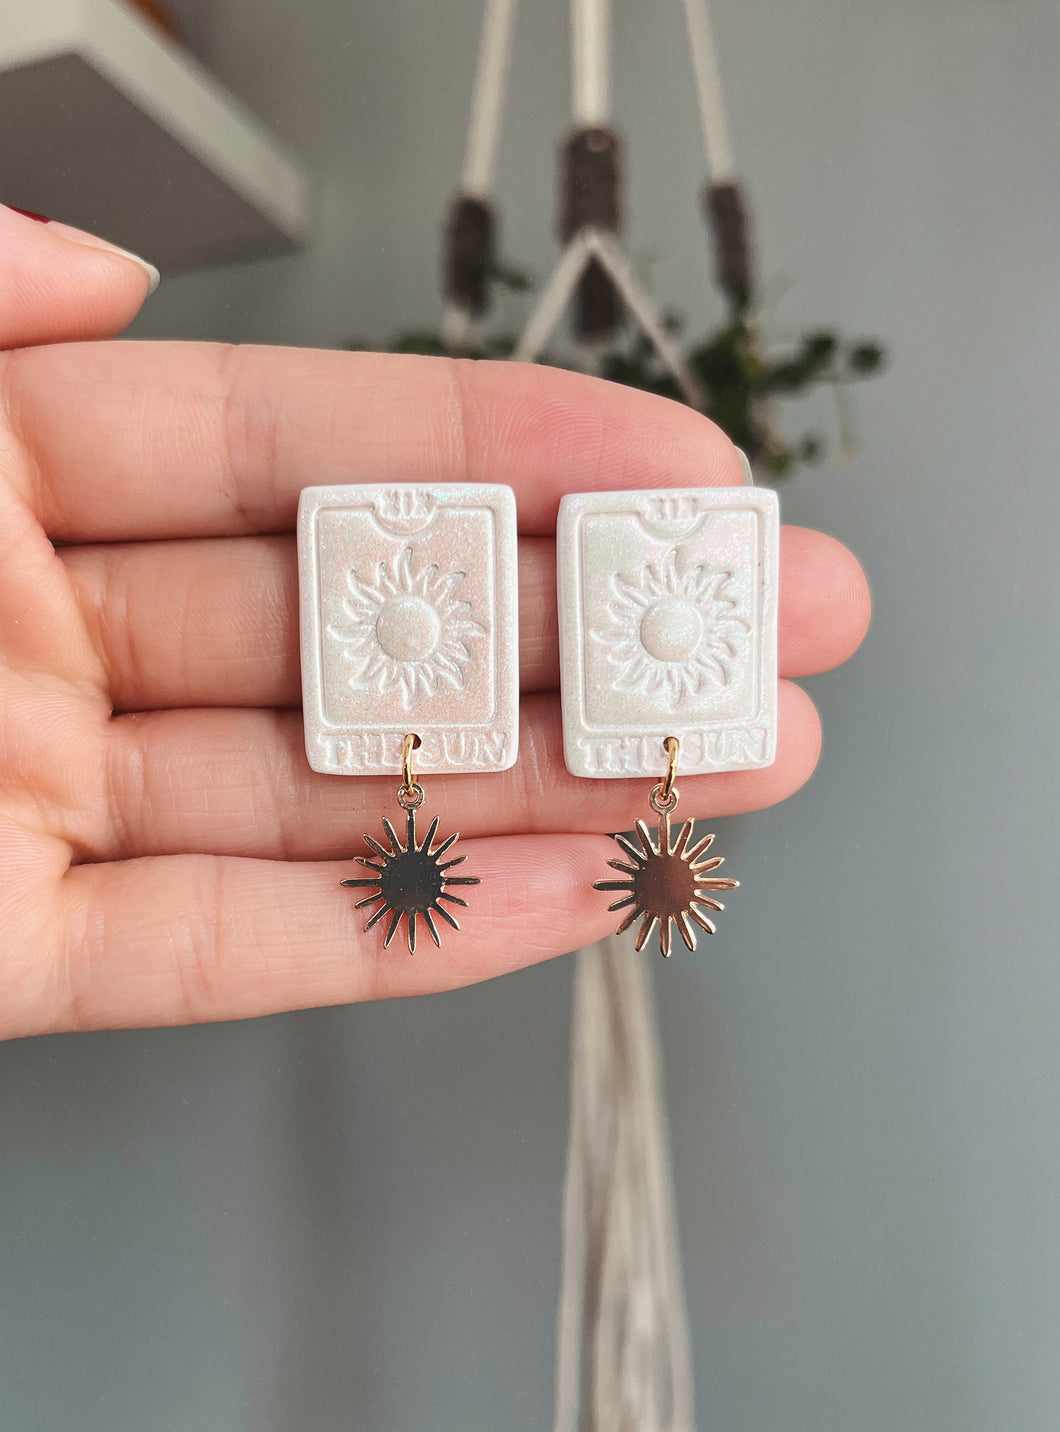 Tarot Card Stud Earrings - Sparkly White Polymer Clay Earrings